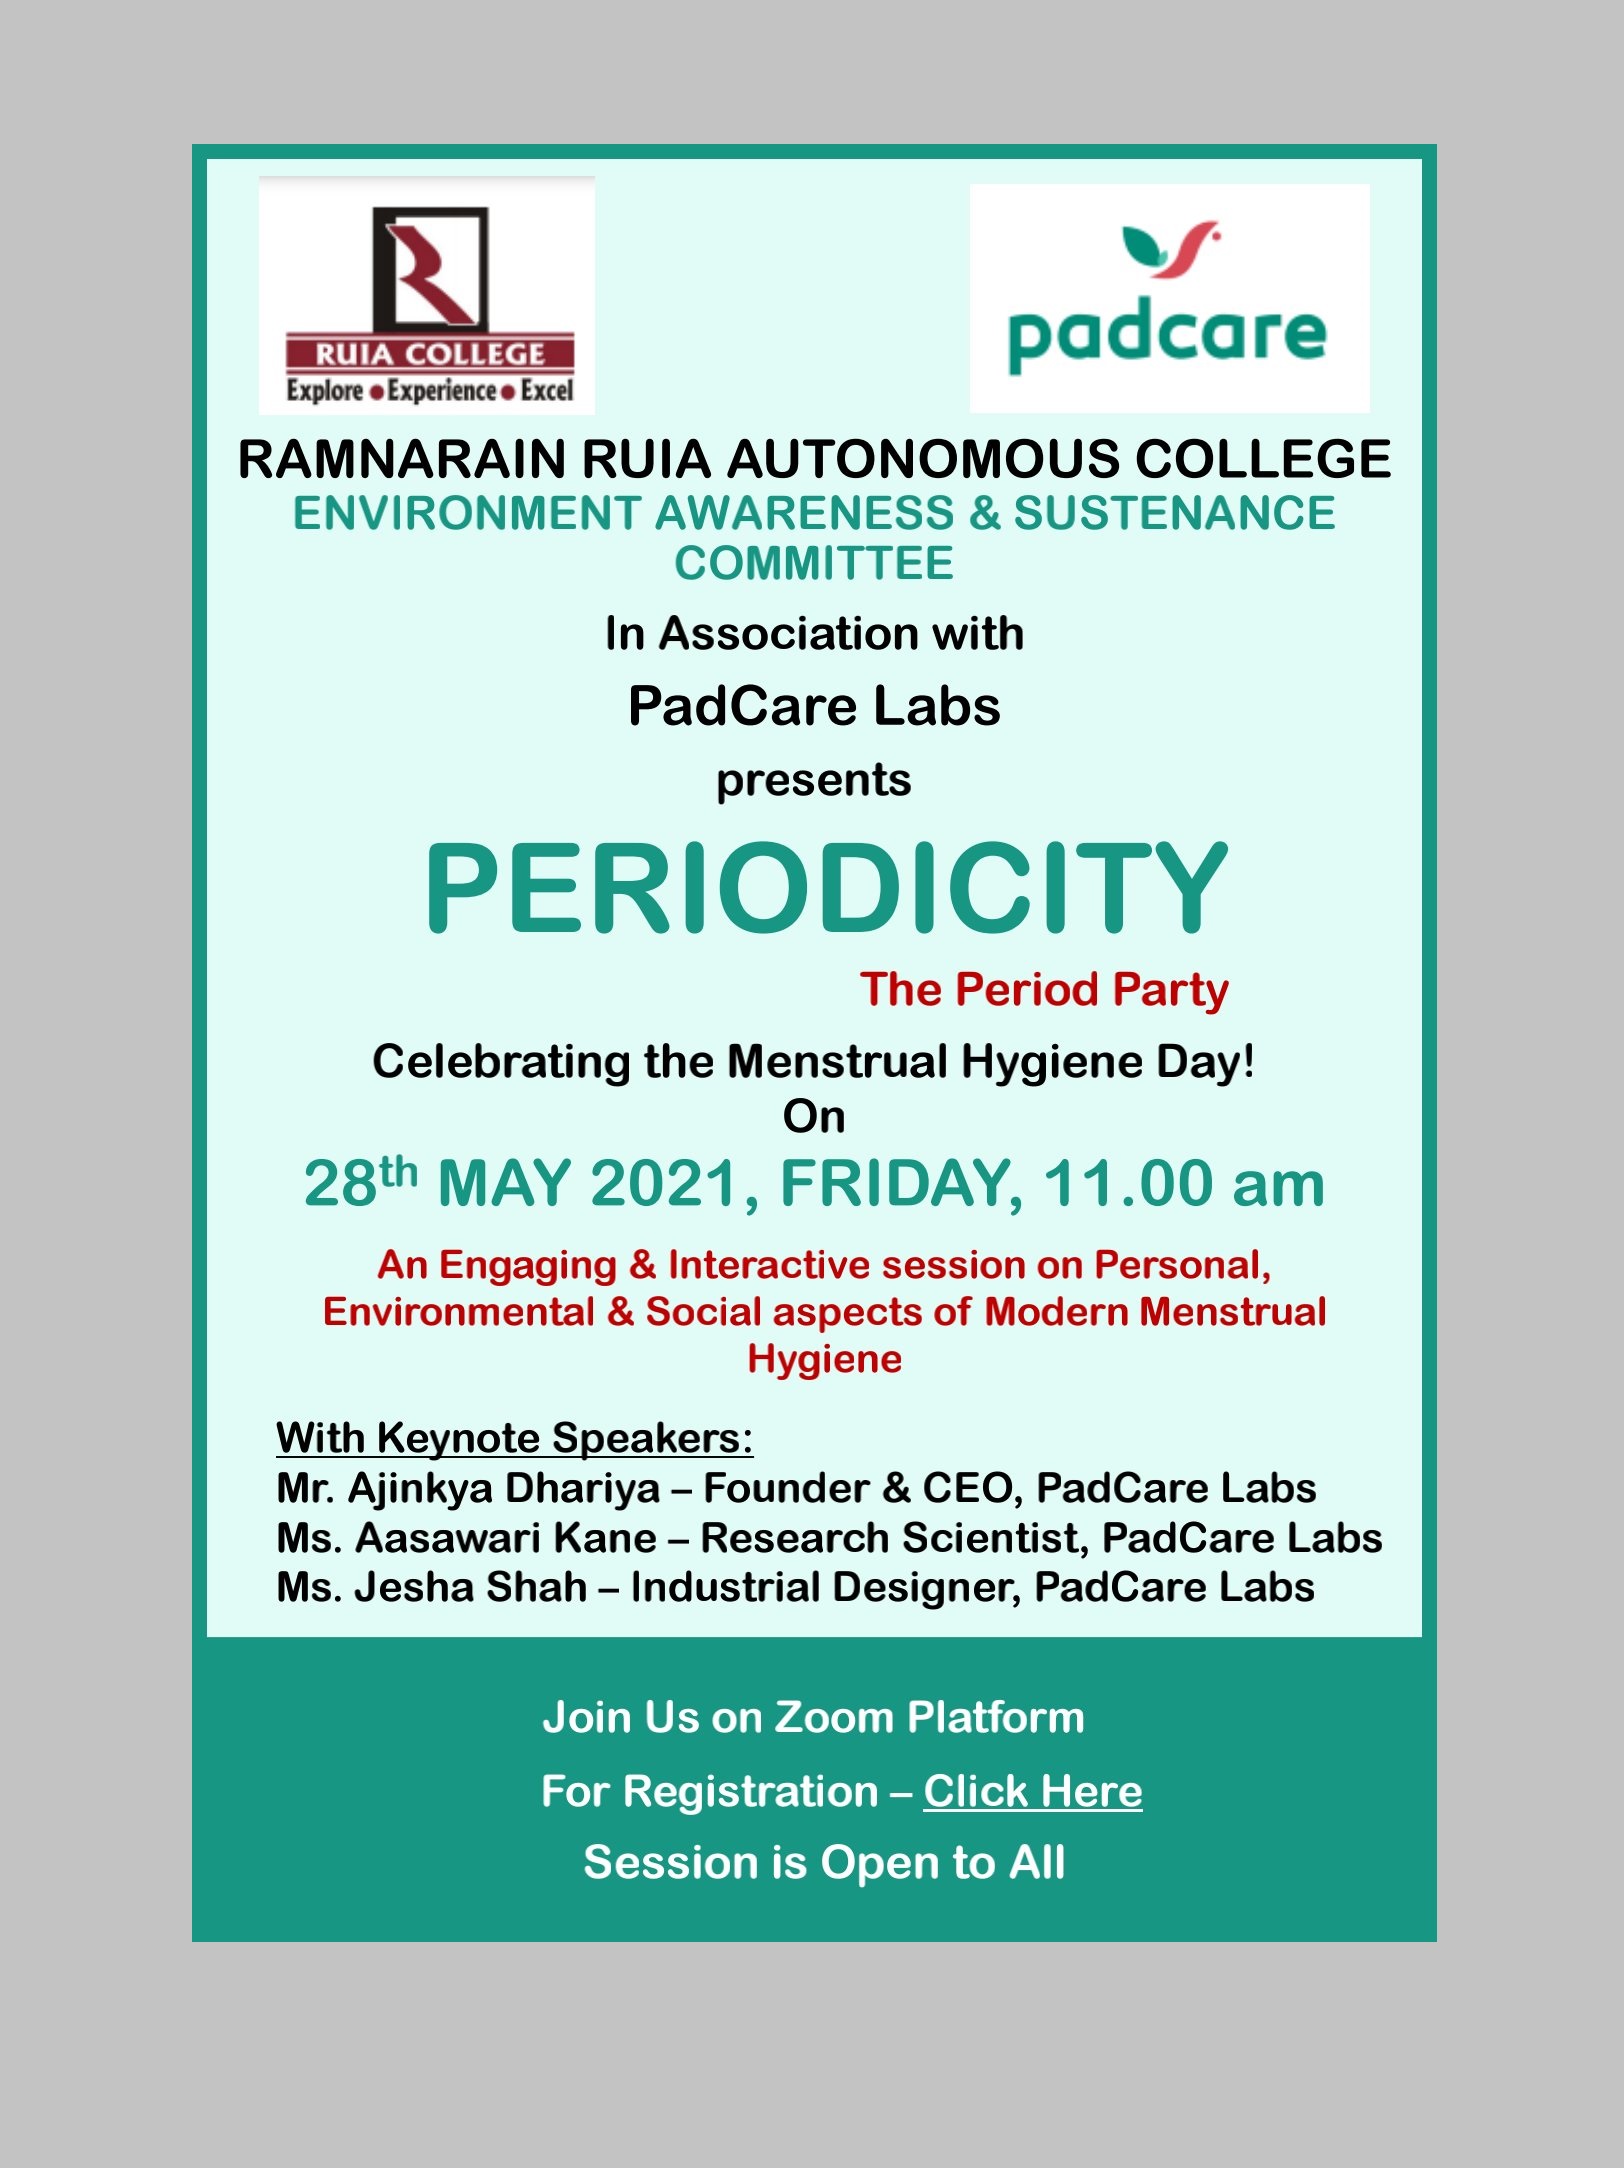 PERIODICITY- The Period Party for celebrating Menstrual Hygiene Day 